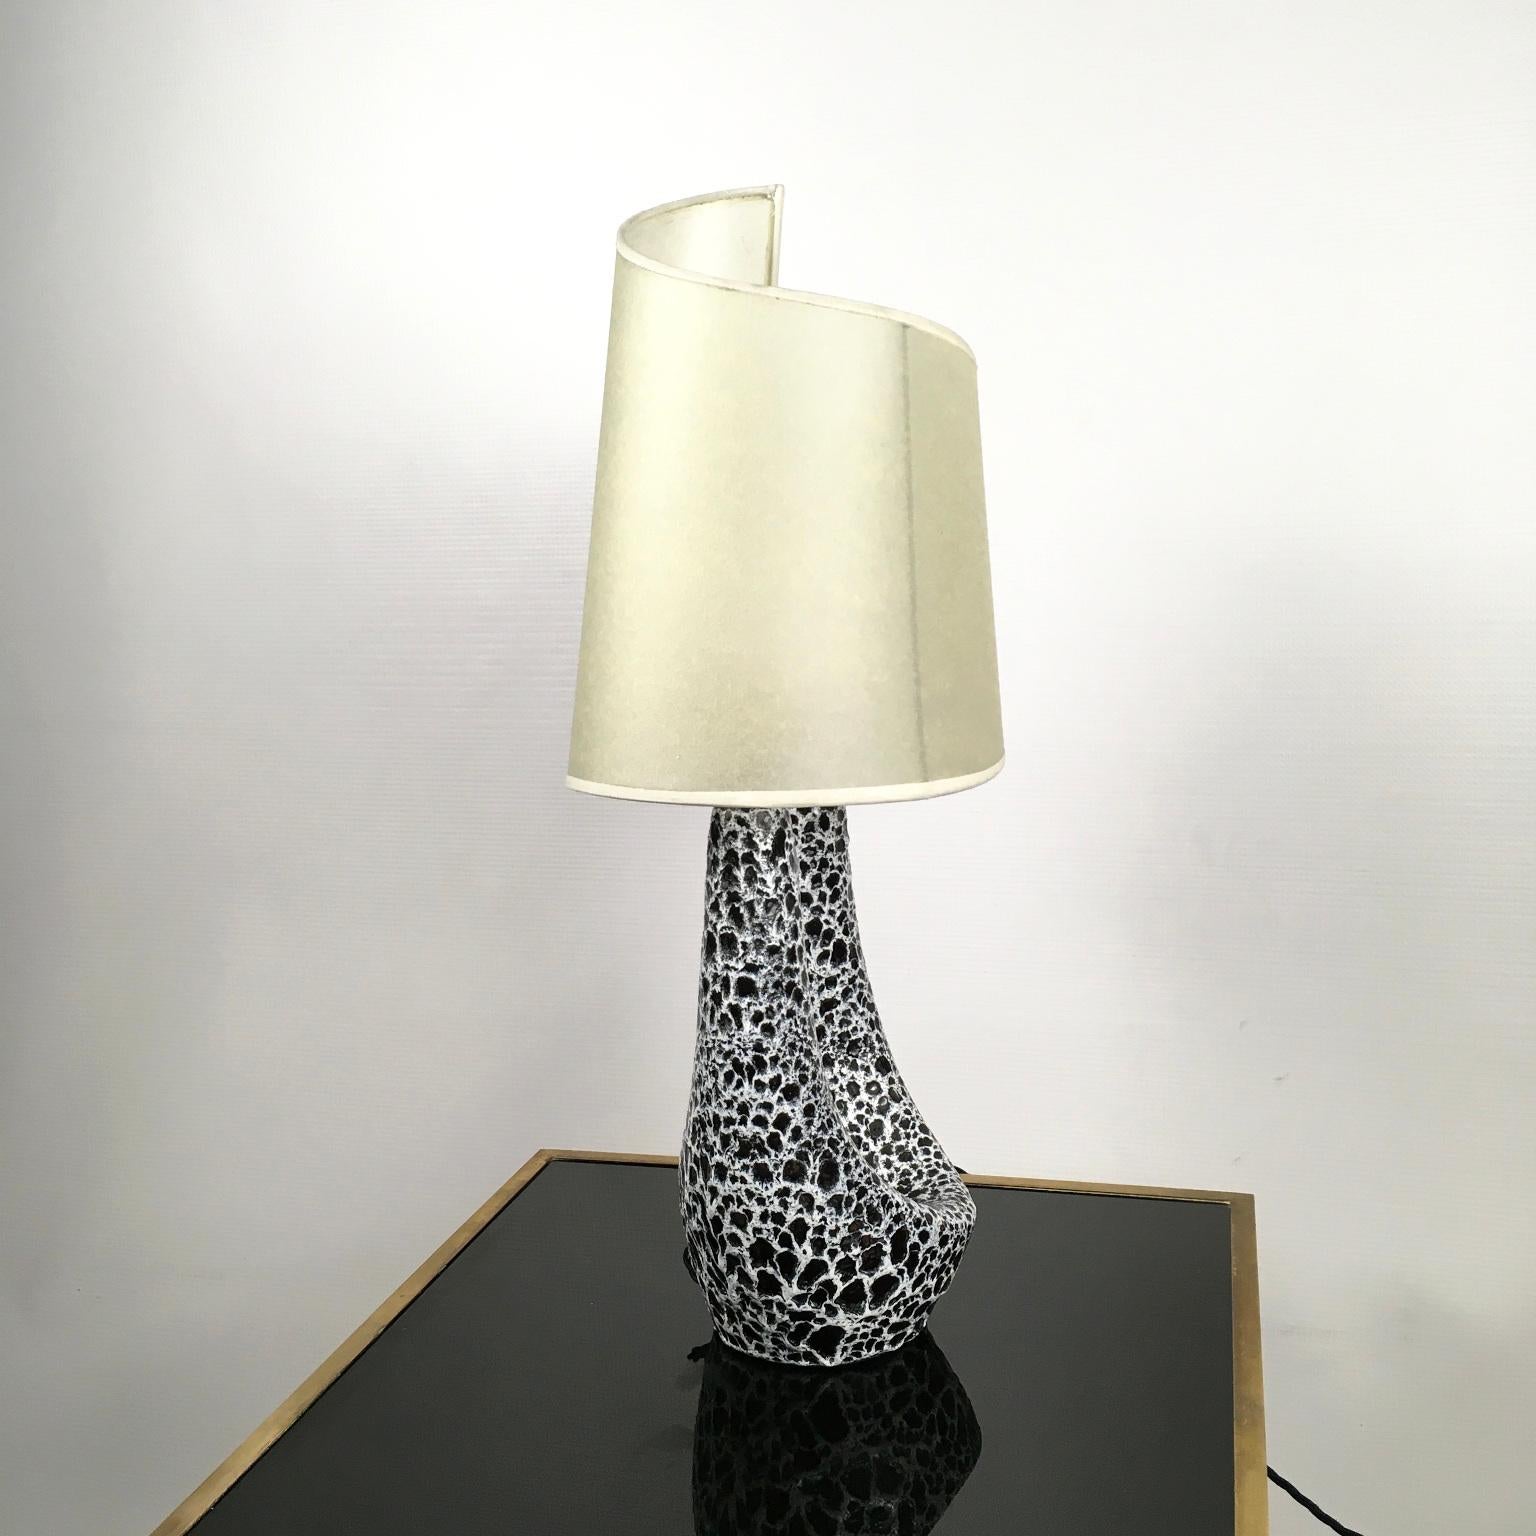 1950s Ceramic Table Lamp by Le Vaucour for Vallauris France For Sale 2